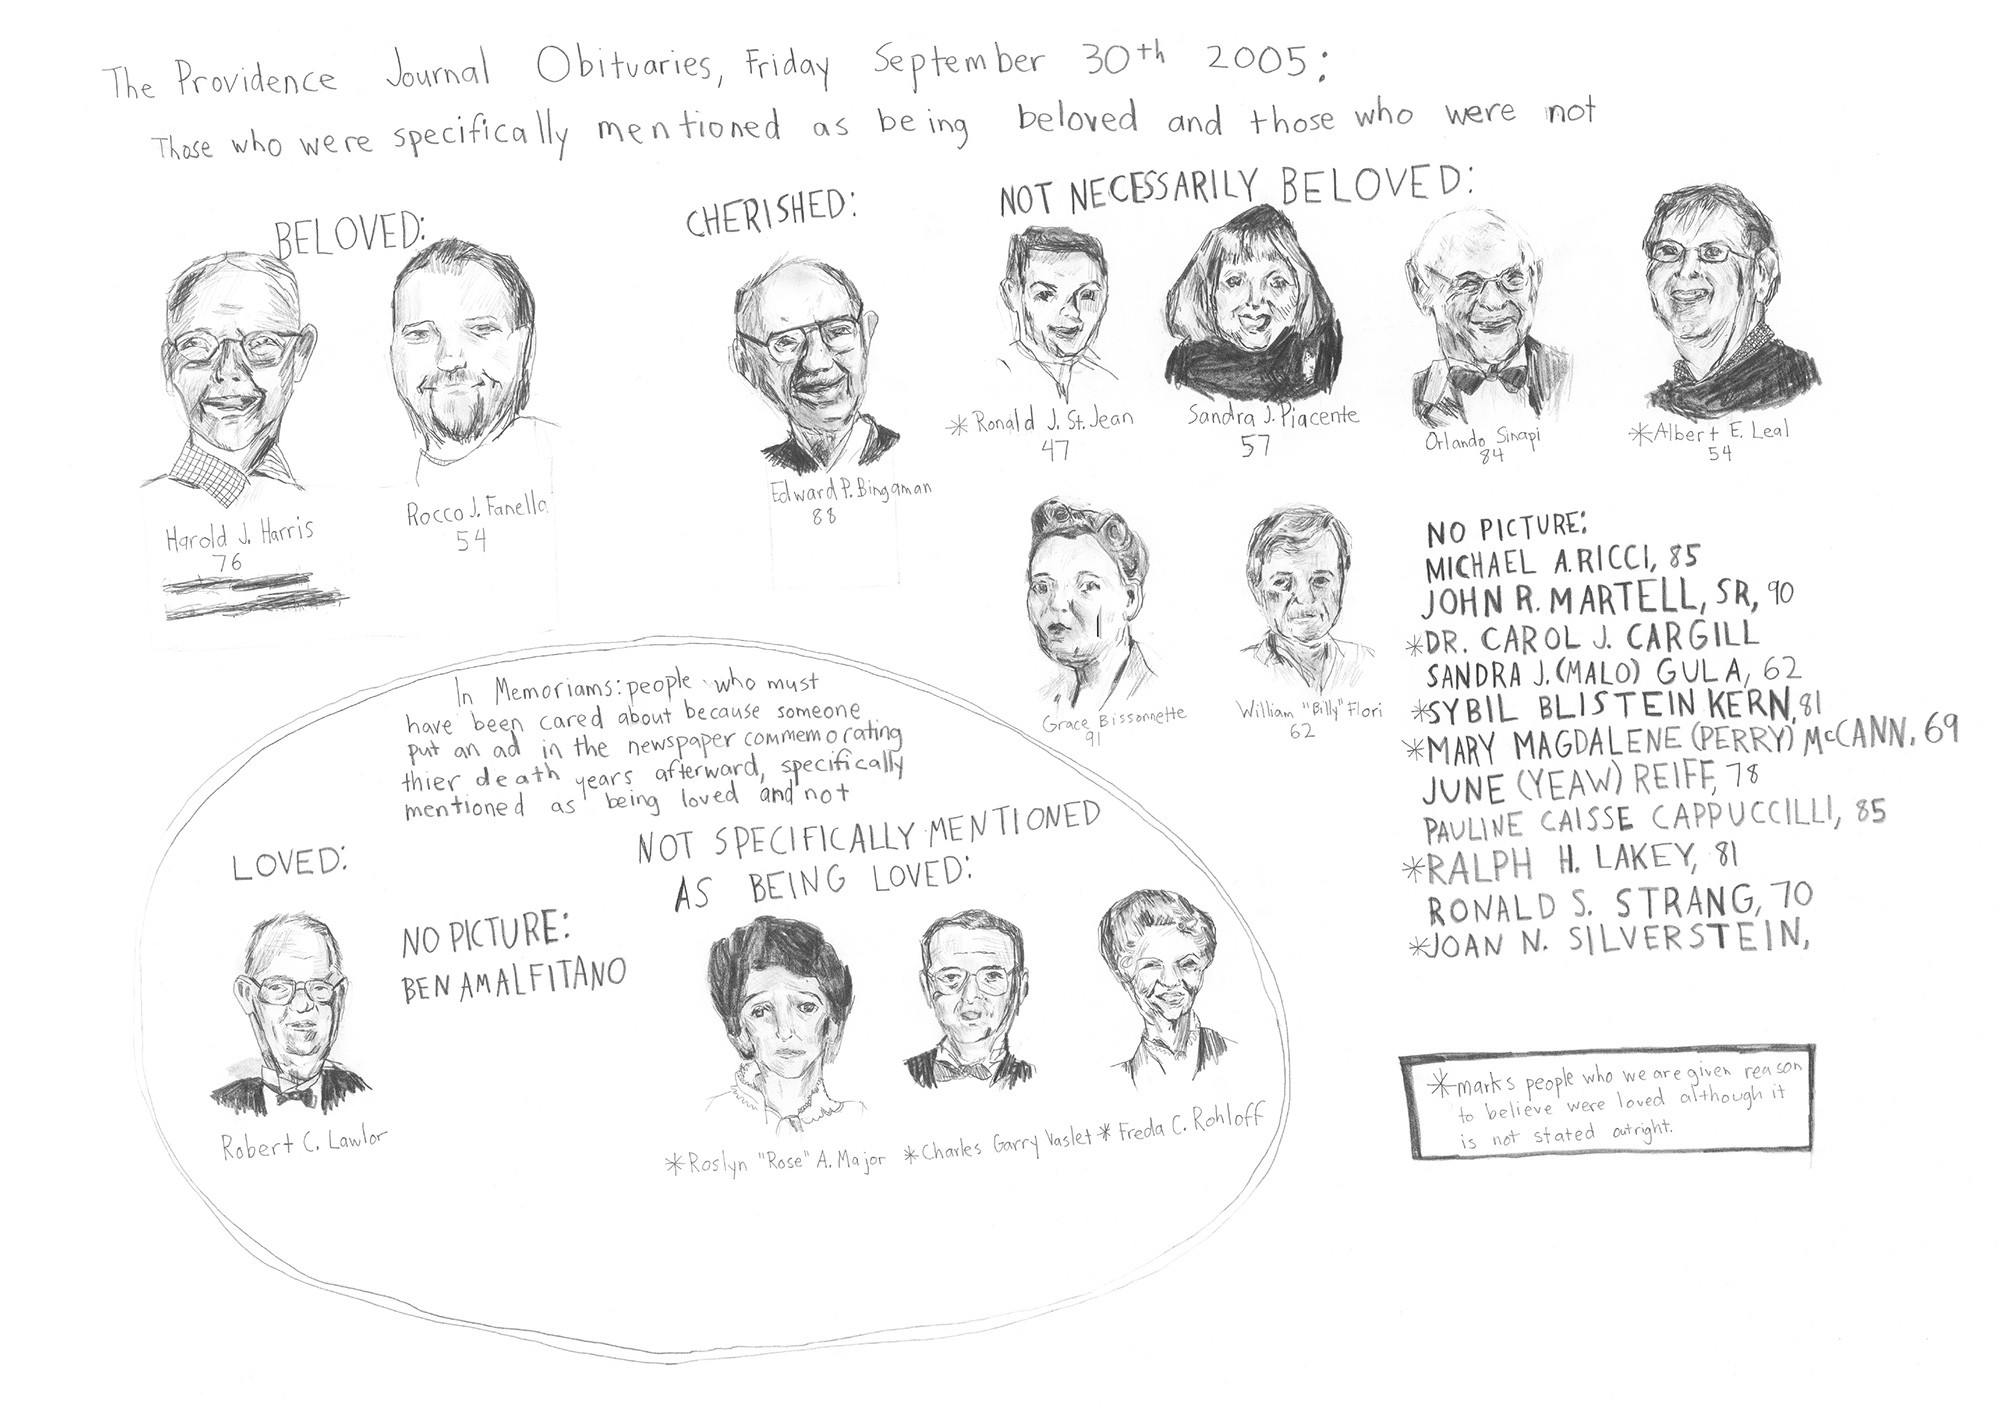 A drawing by artist Kate Ferencz of various people memorialized in the Providence Journal obituaries section on thirty September two thousand five.